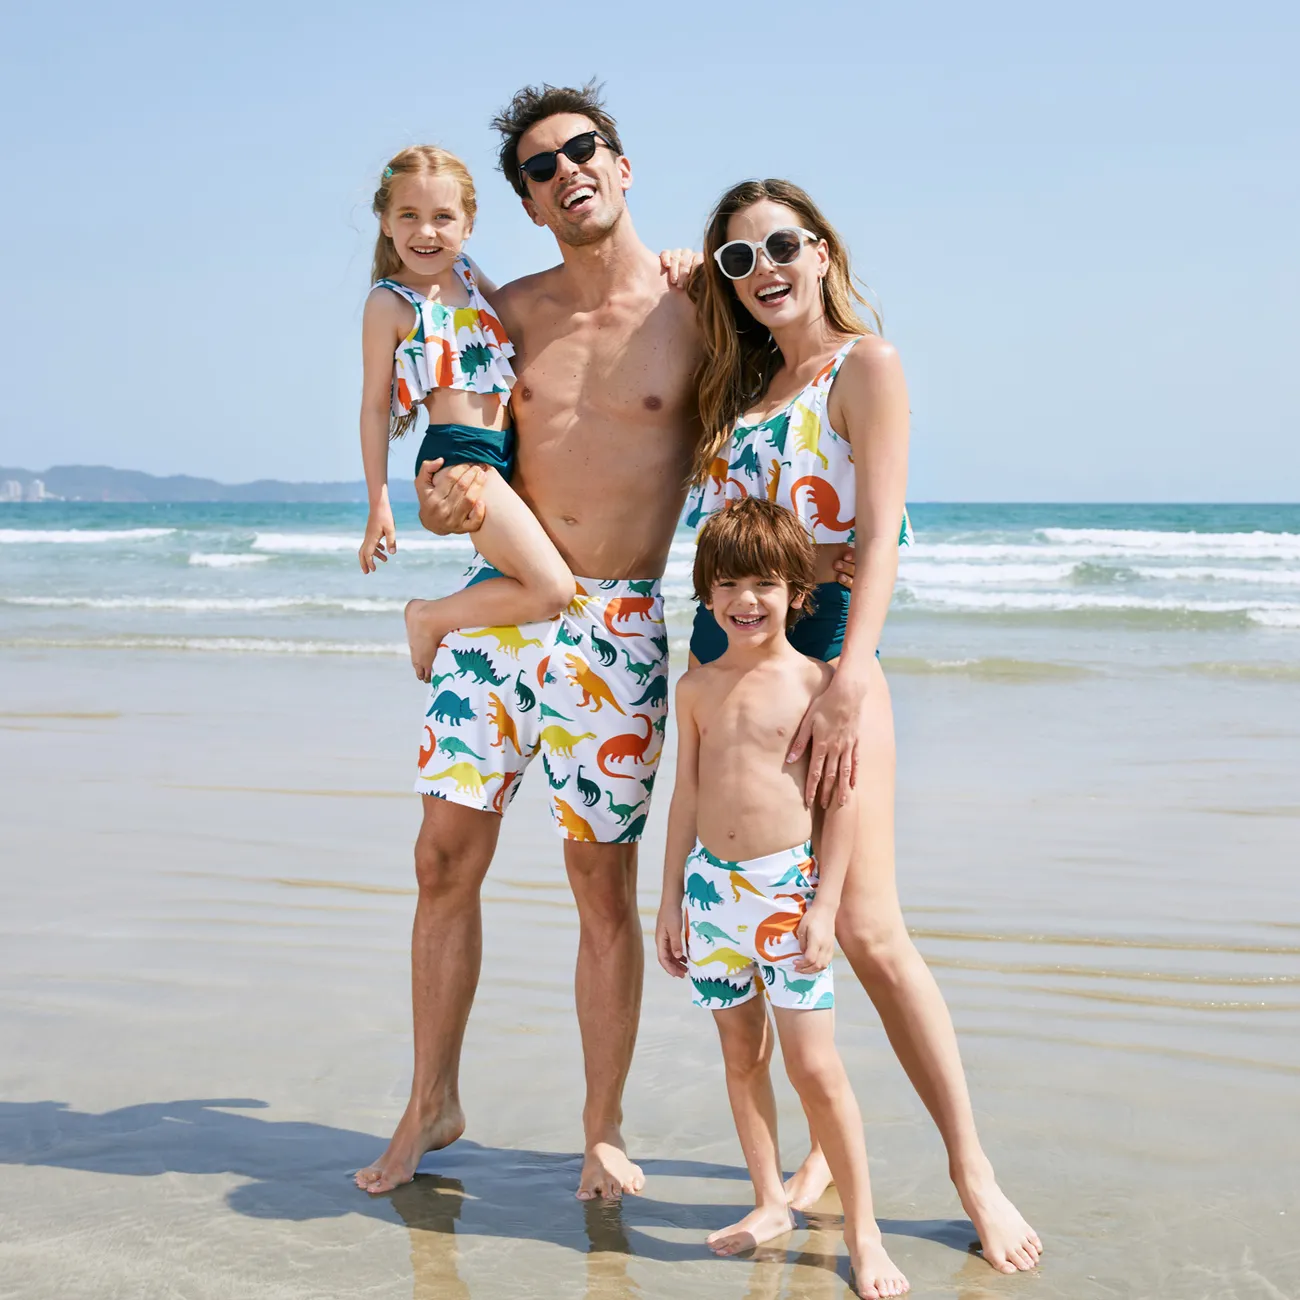 Family Matching All Over Multicolor Dinosaur Print Swim Trunks Shorts and Ruffle Two-Piece Swimsuit White big image 1